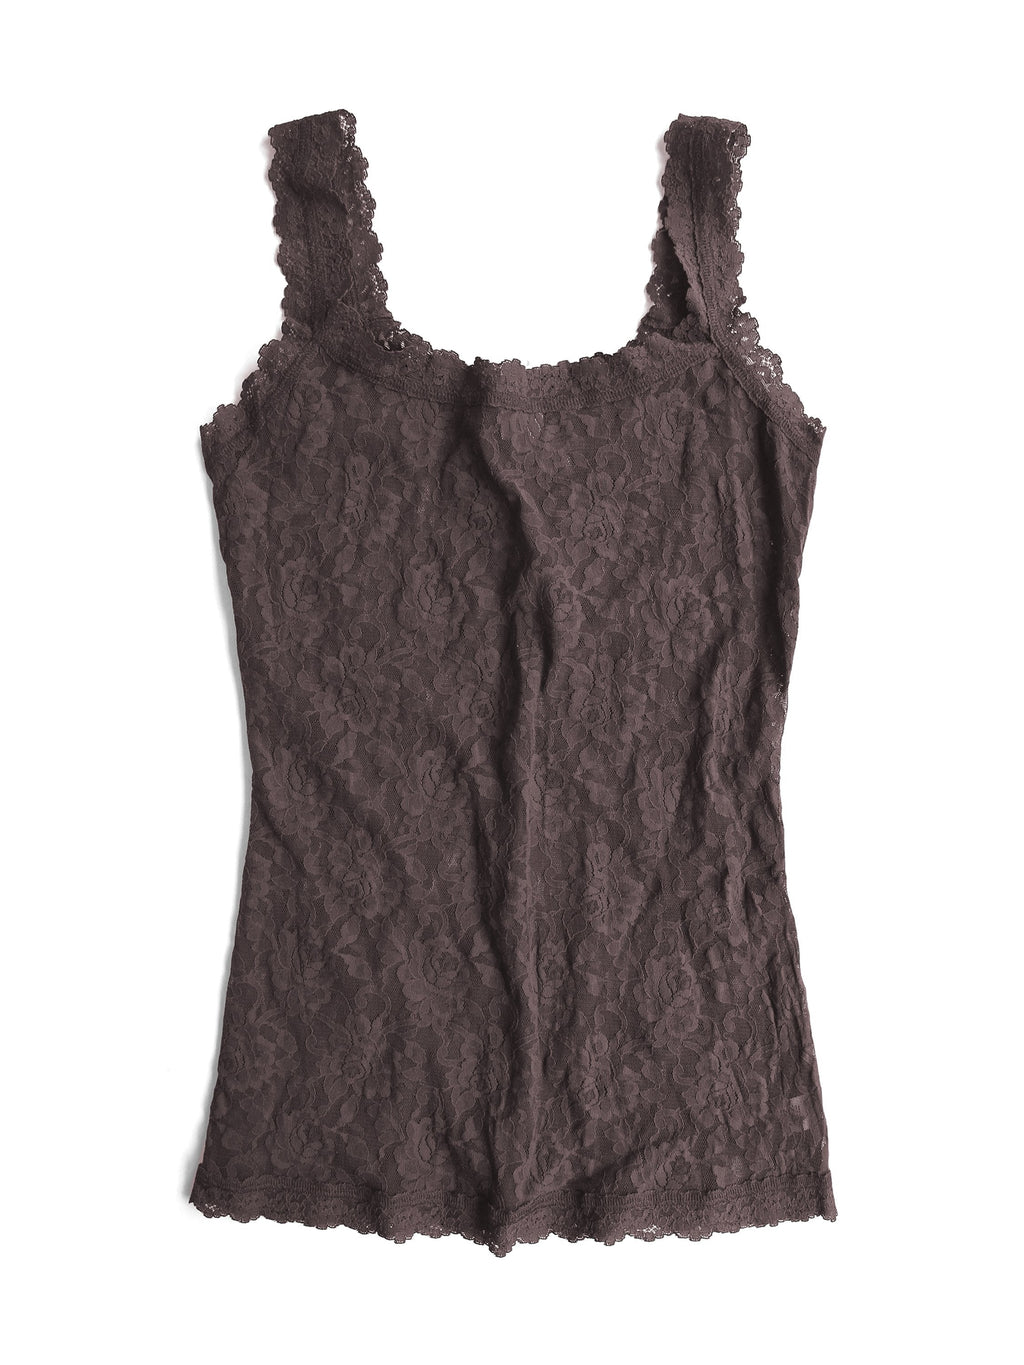 Hanky Panky Signature Sheer Lace Lingerie Camisole 1390L - Macy's